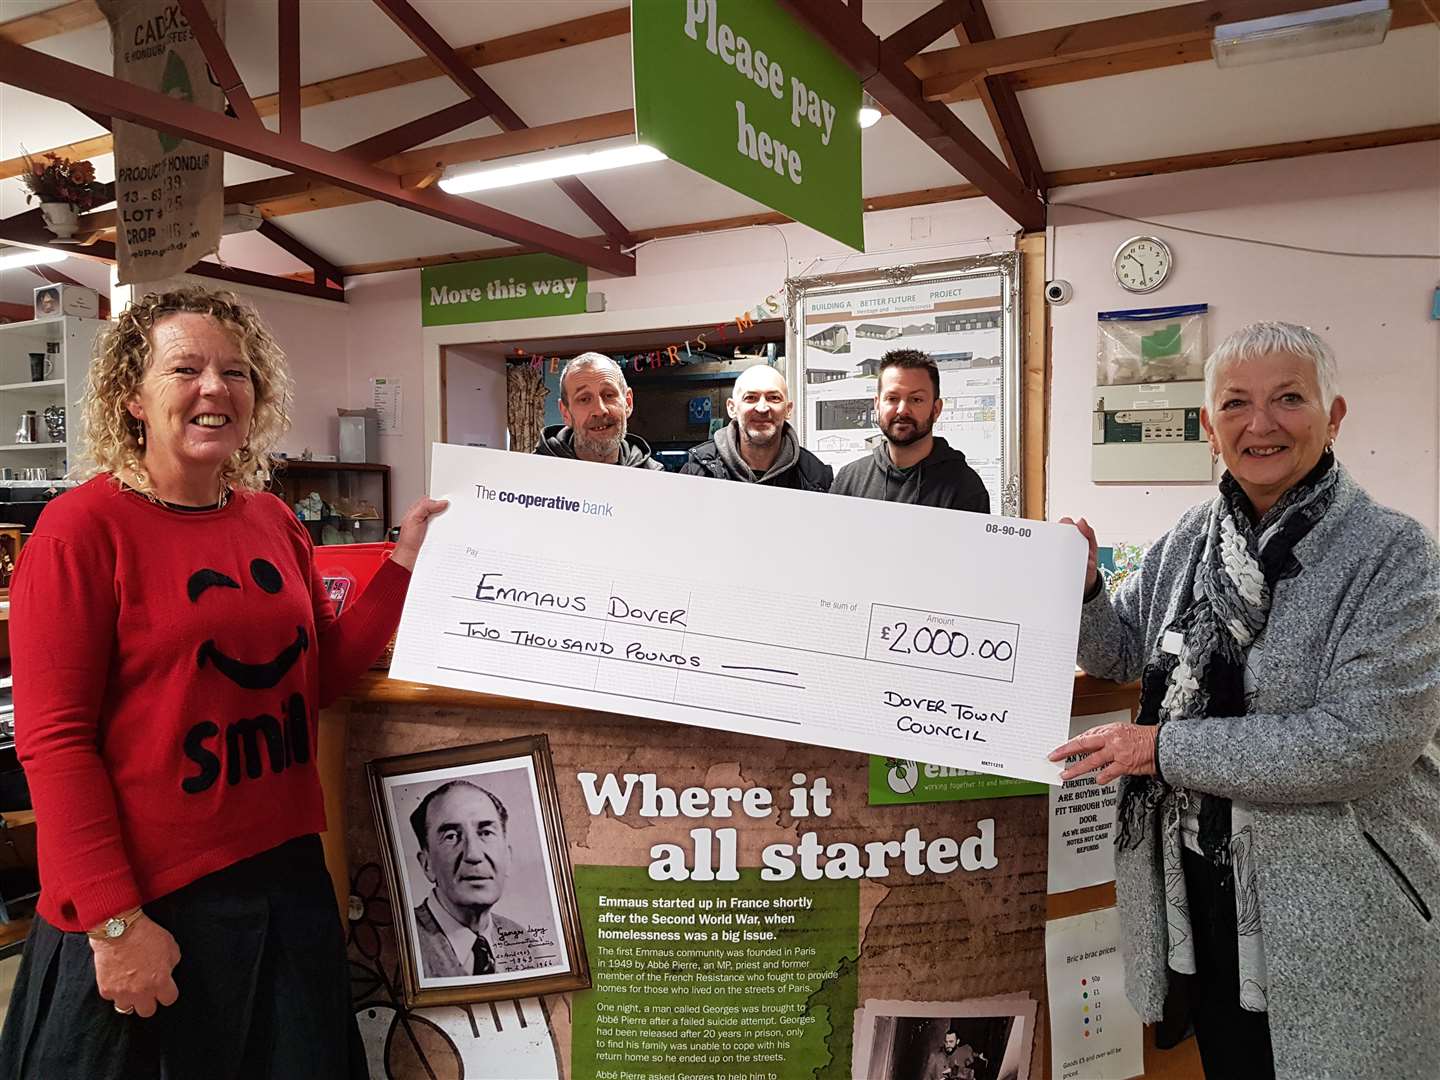 Debra Stevenson of Emmaus, receives the cheque from Cllr Cllr Pam Brivio at the charity's base. Emmaus residents are in the background. Picture: Dover Town Council